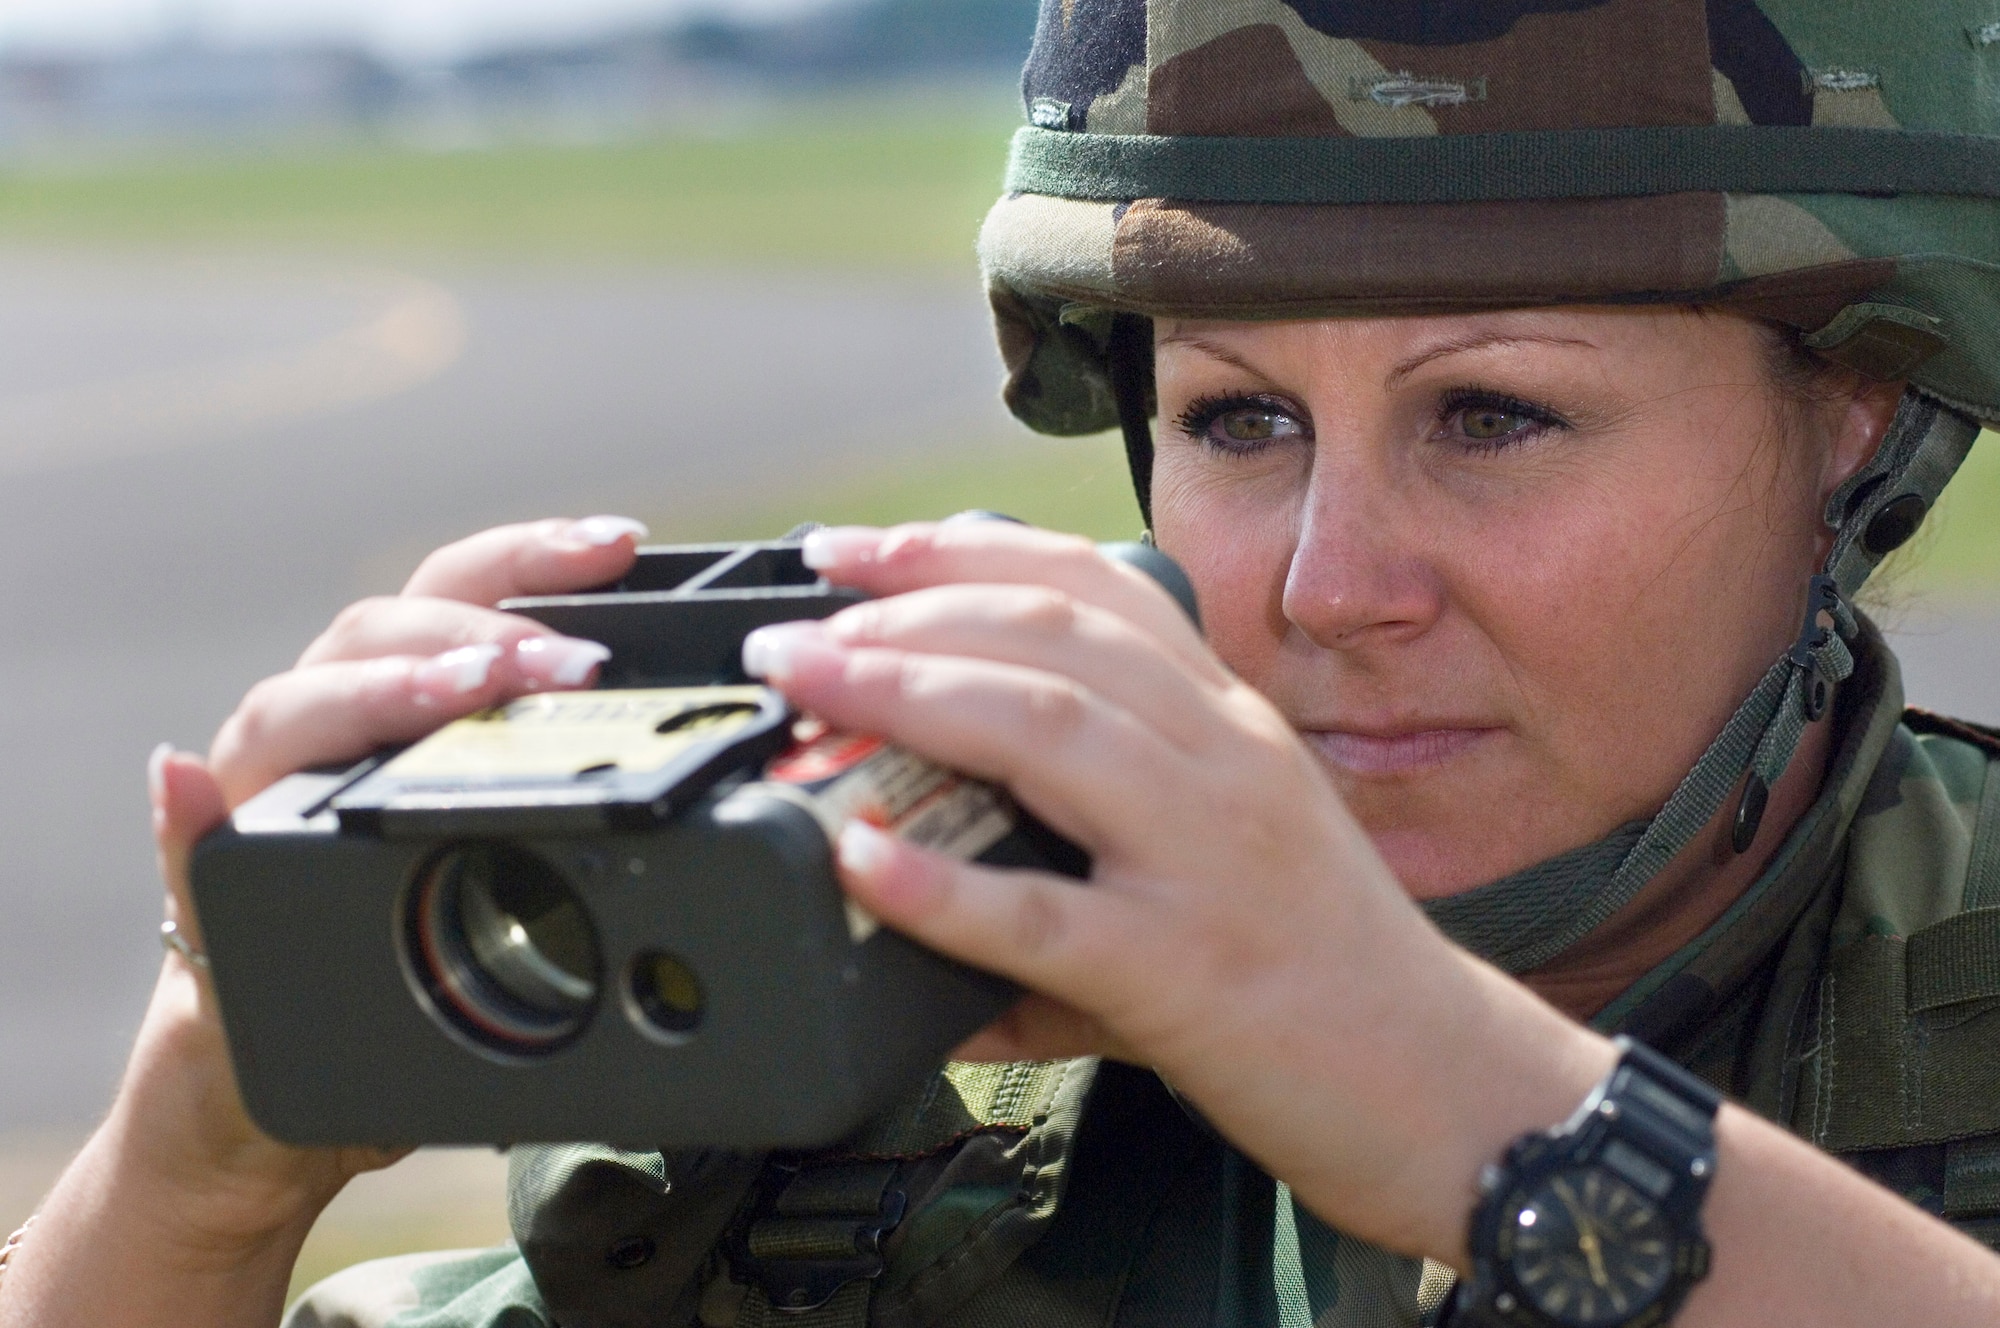 Tech. Sgt. Gina Faulds prepares to measure the line of visibility during field training at Wiesbaden Army Airfield, Germany, June 21. Sergeant Faulds, of Chino, Calif., is a battle weather forecaster and the NCO in charge of the 7th Weather Squadron's Detachment 6. (U.S. Air Force photo/Master Sgt. John E. Lasky)